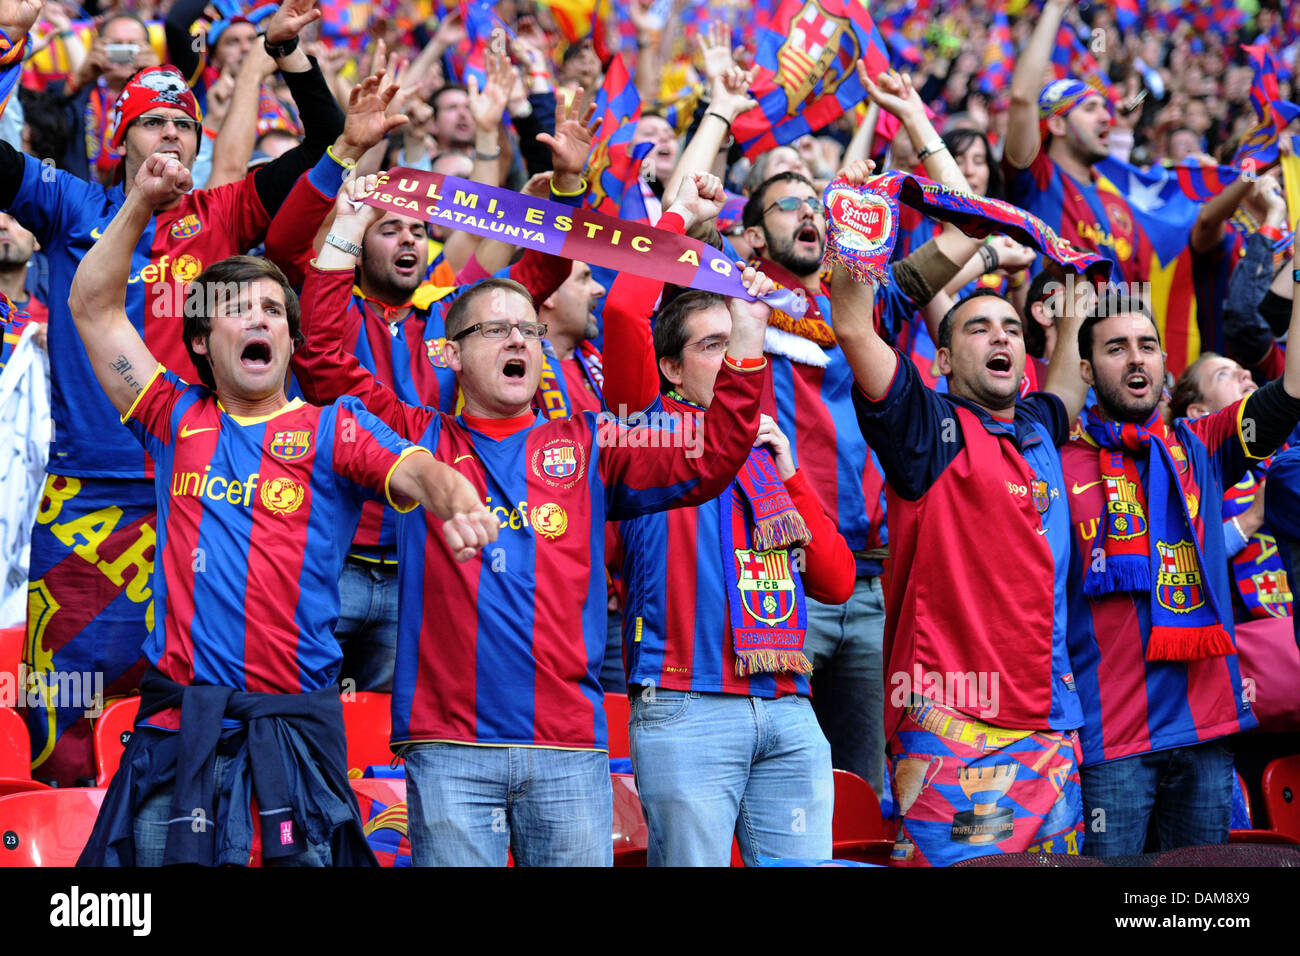 Barcelona's fans celebrate in the UEFA Champions League final FC Barcelona vs Manchester United at Wembley Stadium in London, Britain, 28 May 2011. Photo: Revierfoto Stock - Alamy